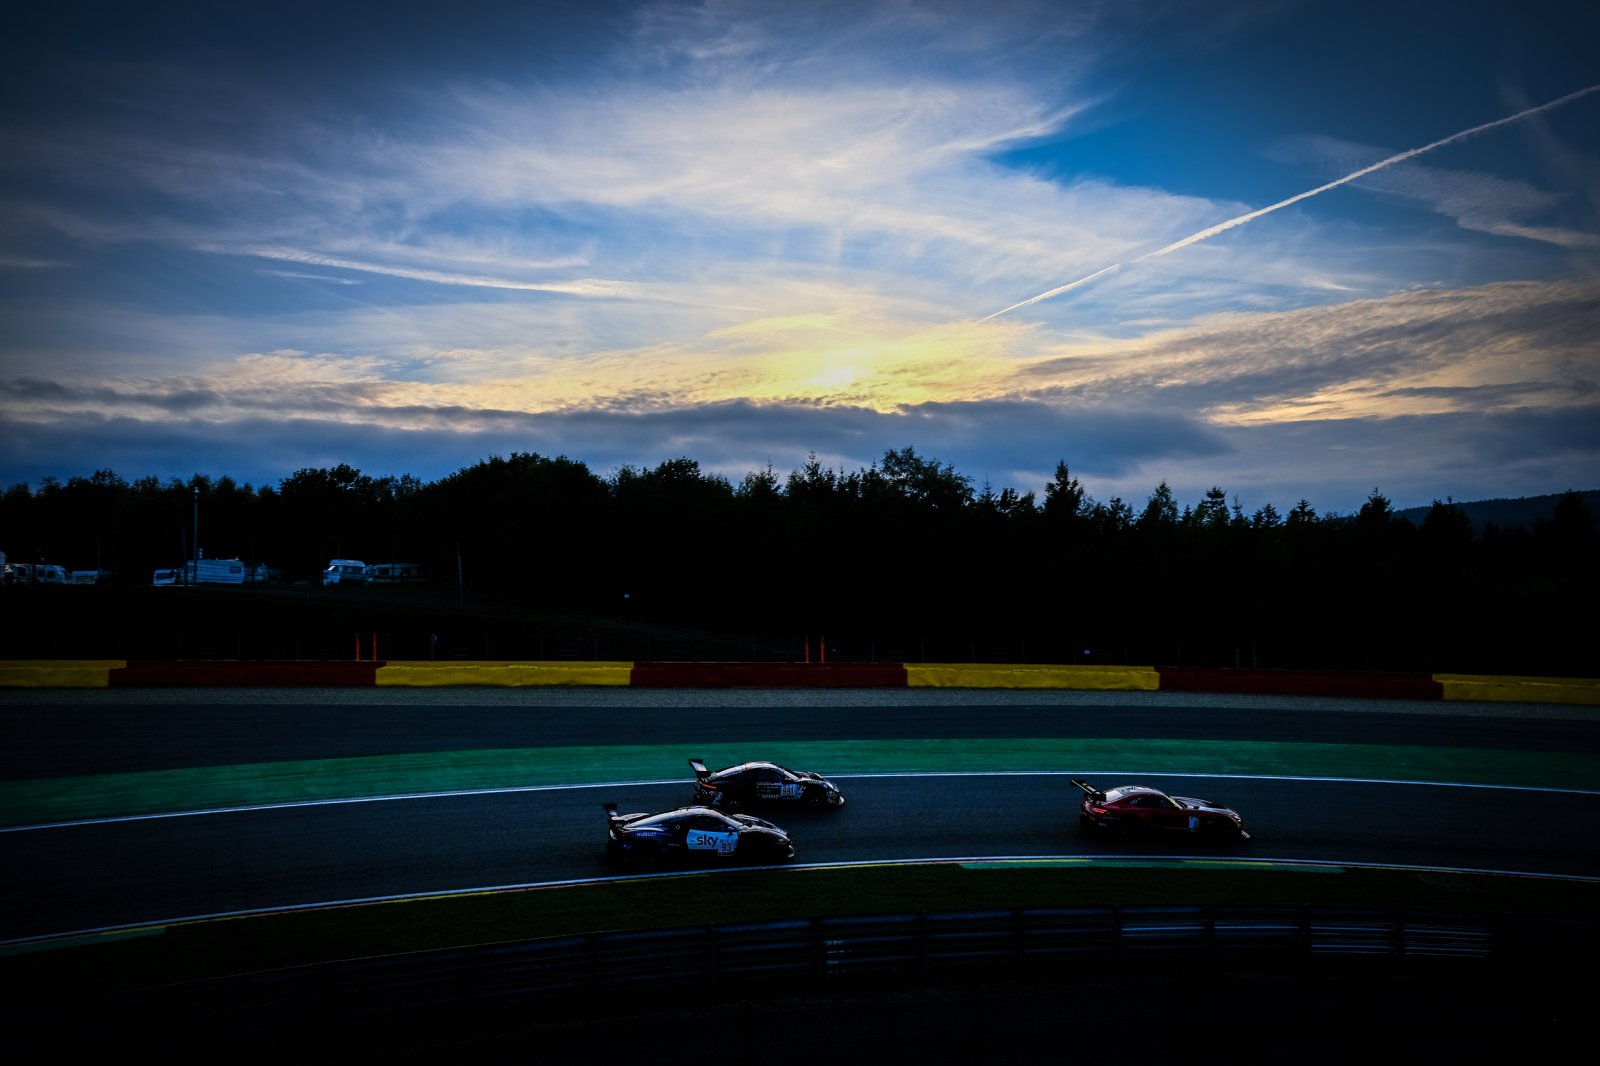 GPX Racing Porsche leads after dark at Total 24 Hours of Spa test